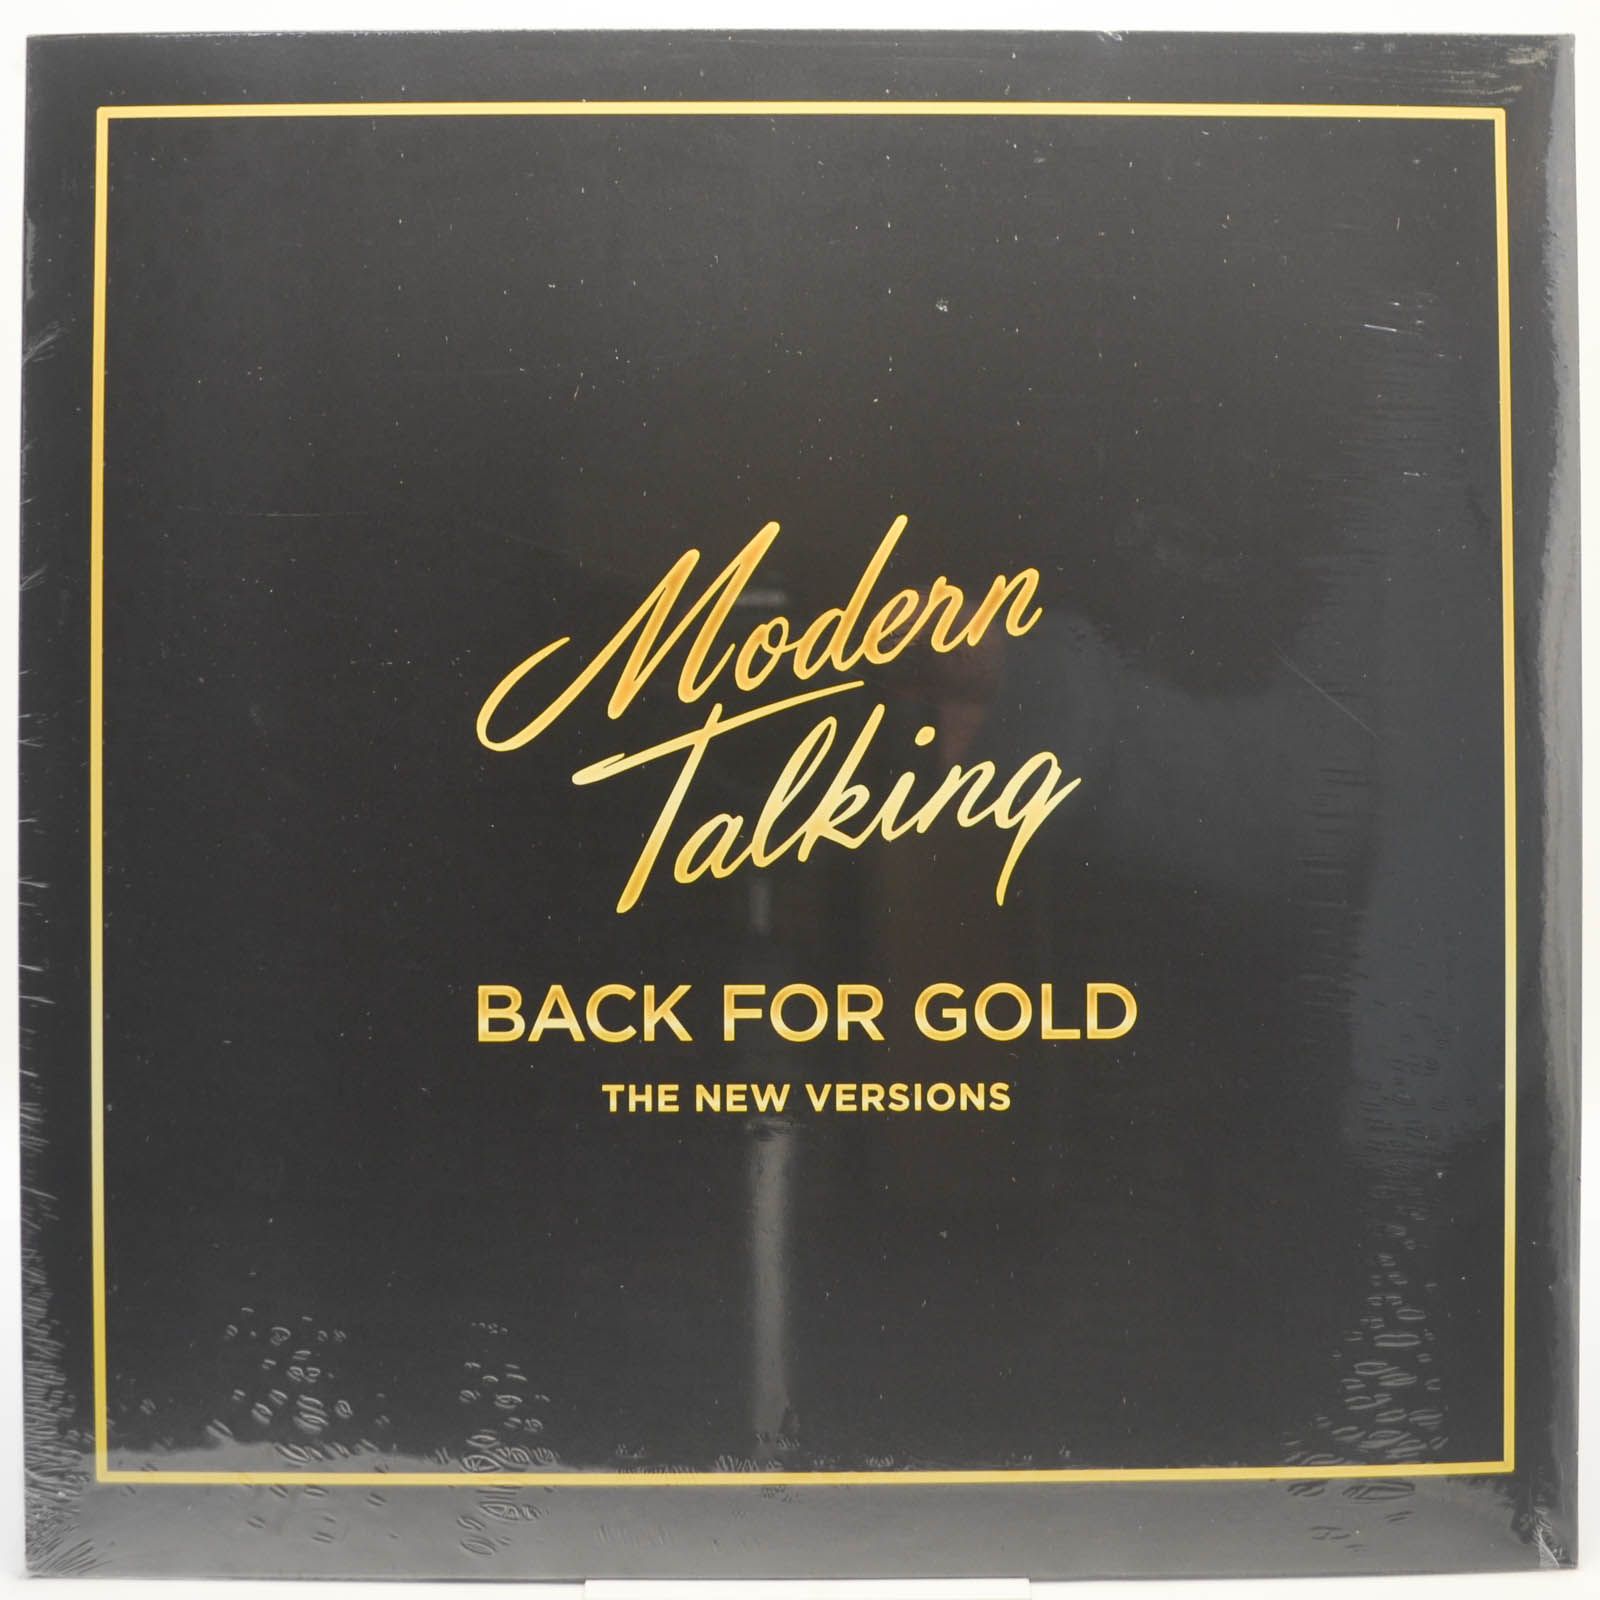 Modern Talking — Back For Gold - The New Versions, 2017